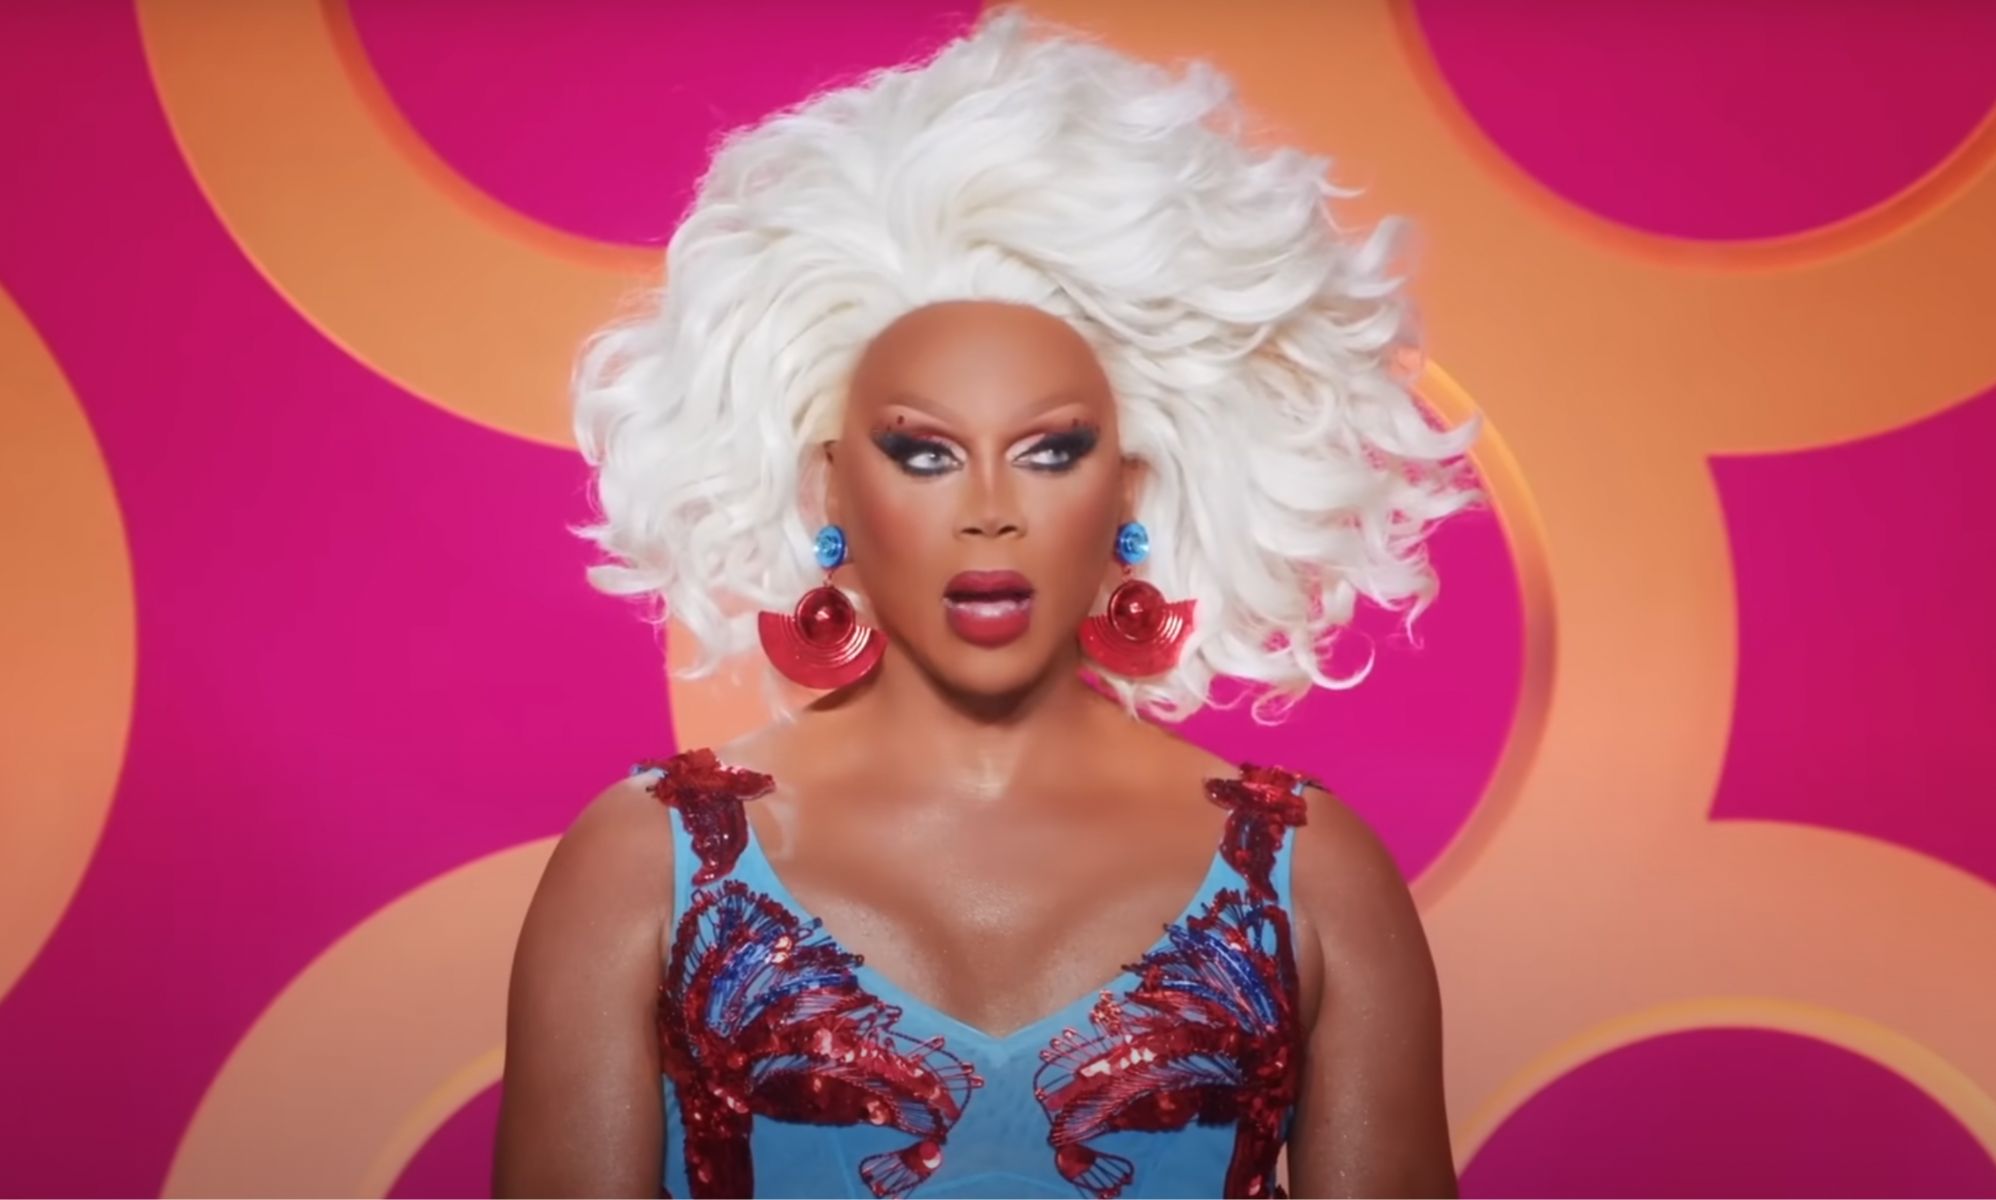 Winner of Drag Race Rejects Invitation to Compete in Canada vs the World